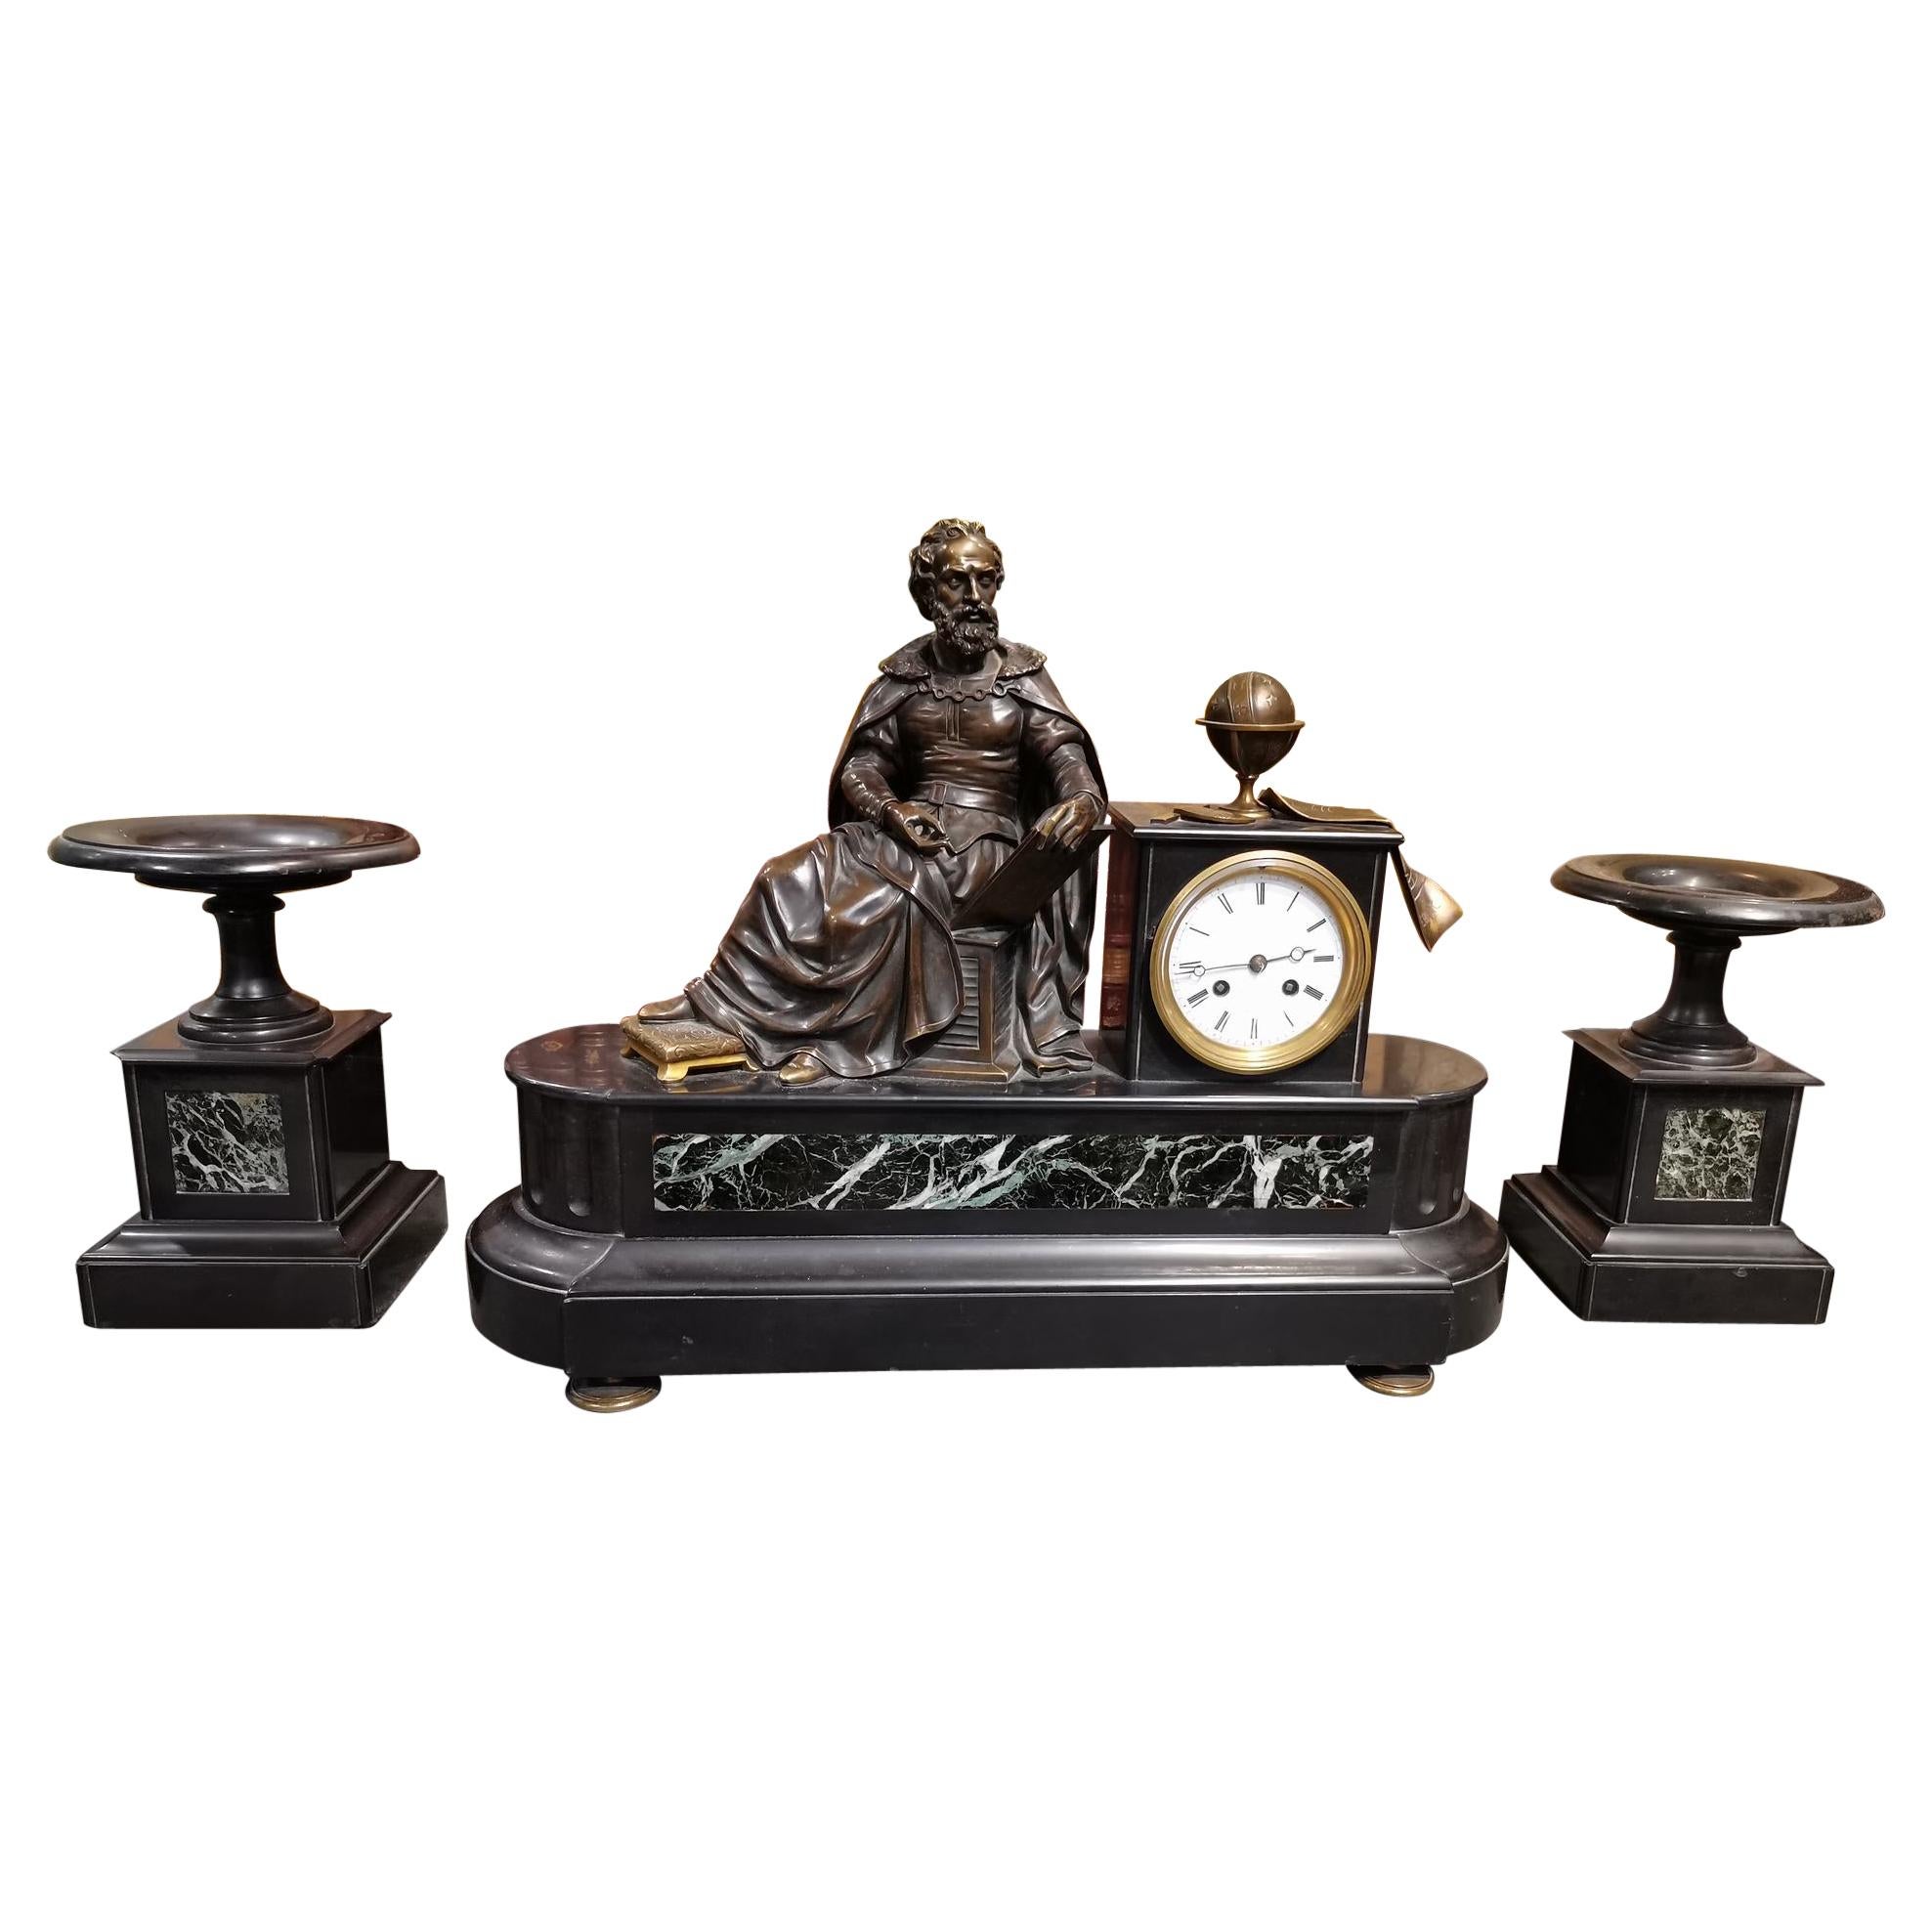 Marble and Bronze Clock with Allegory of Astronomy Representing Copernico